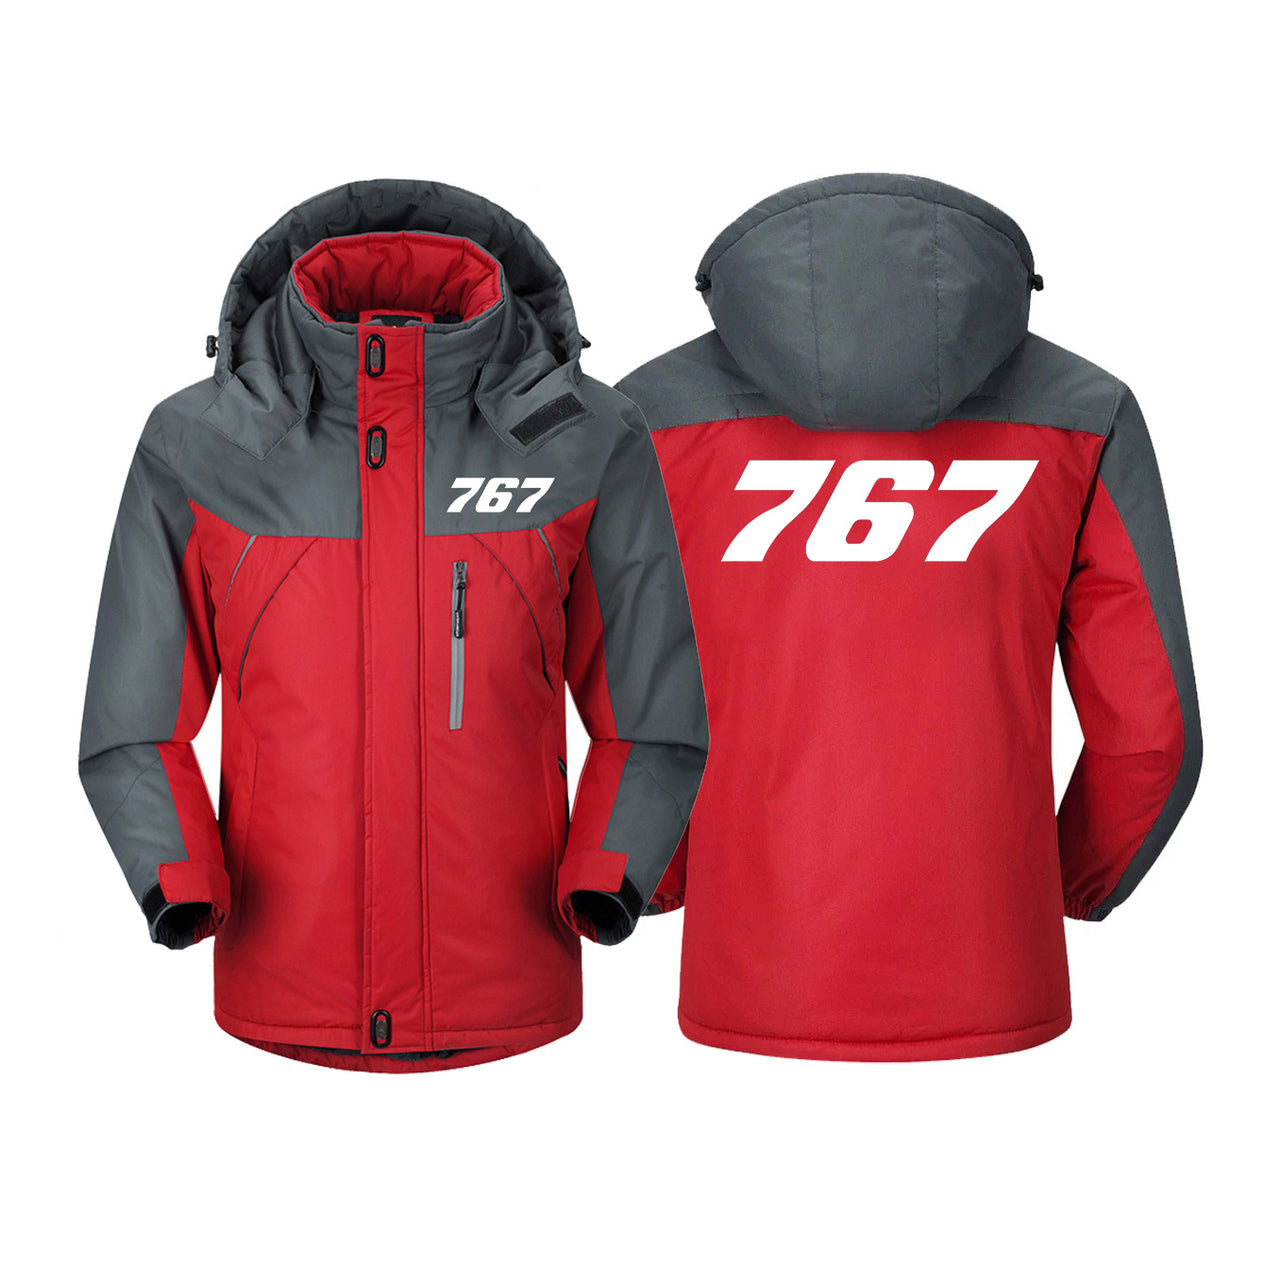 767 Flat Text Designed Thick Winter Jackets